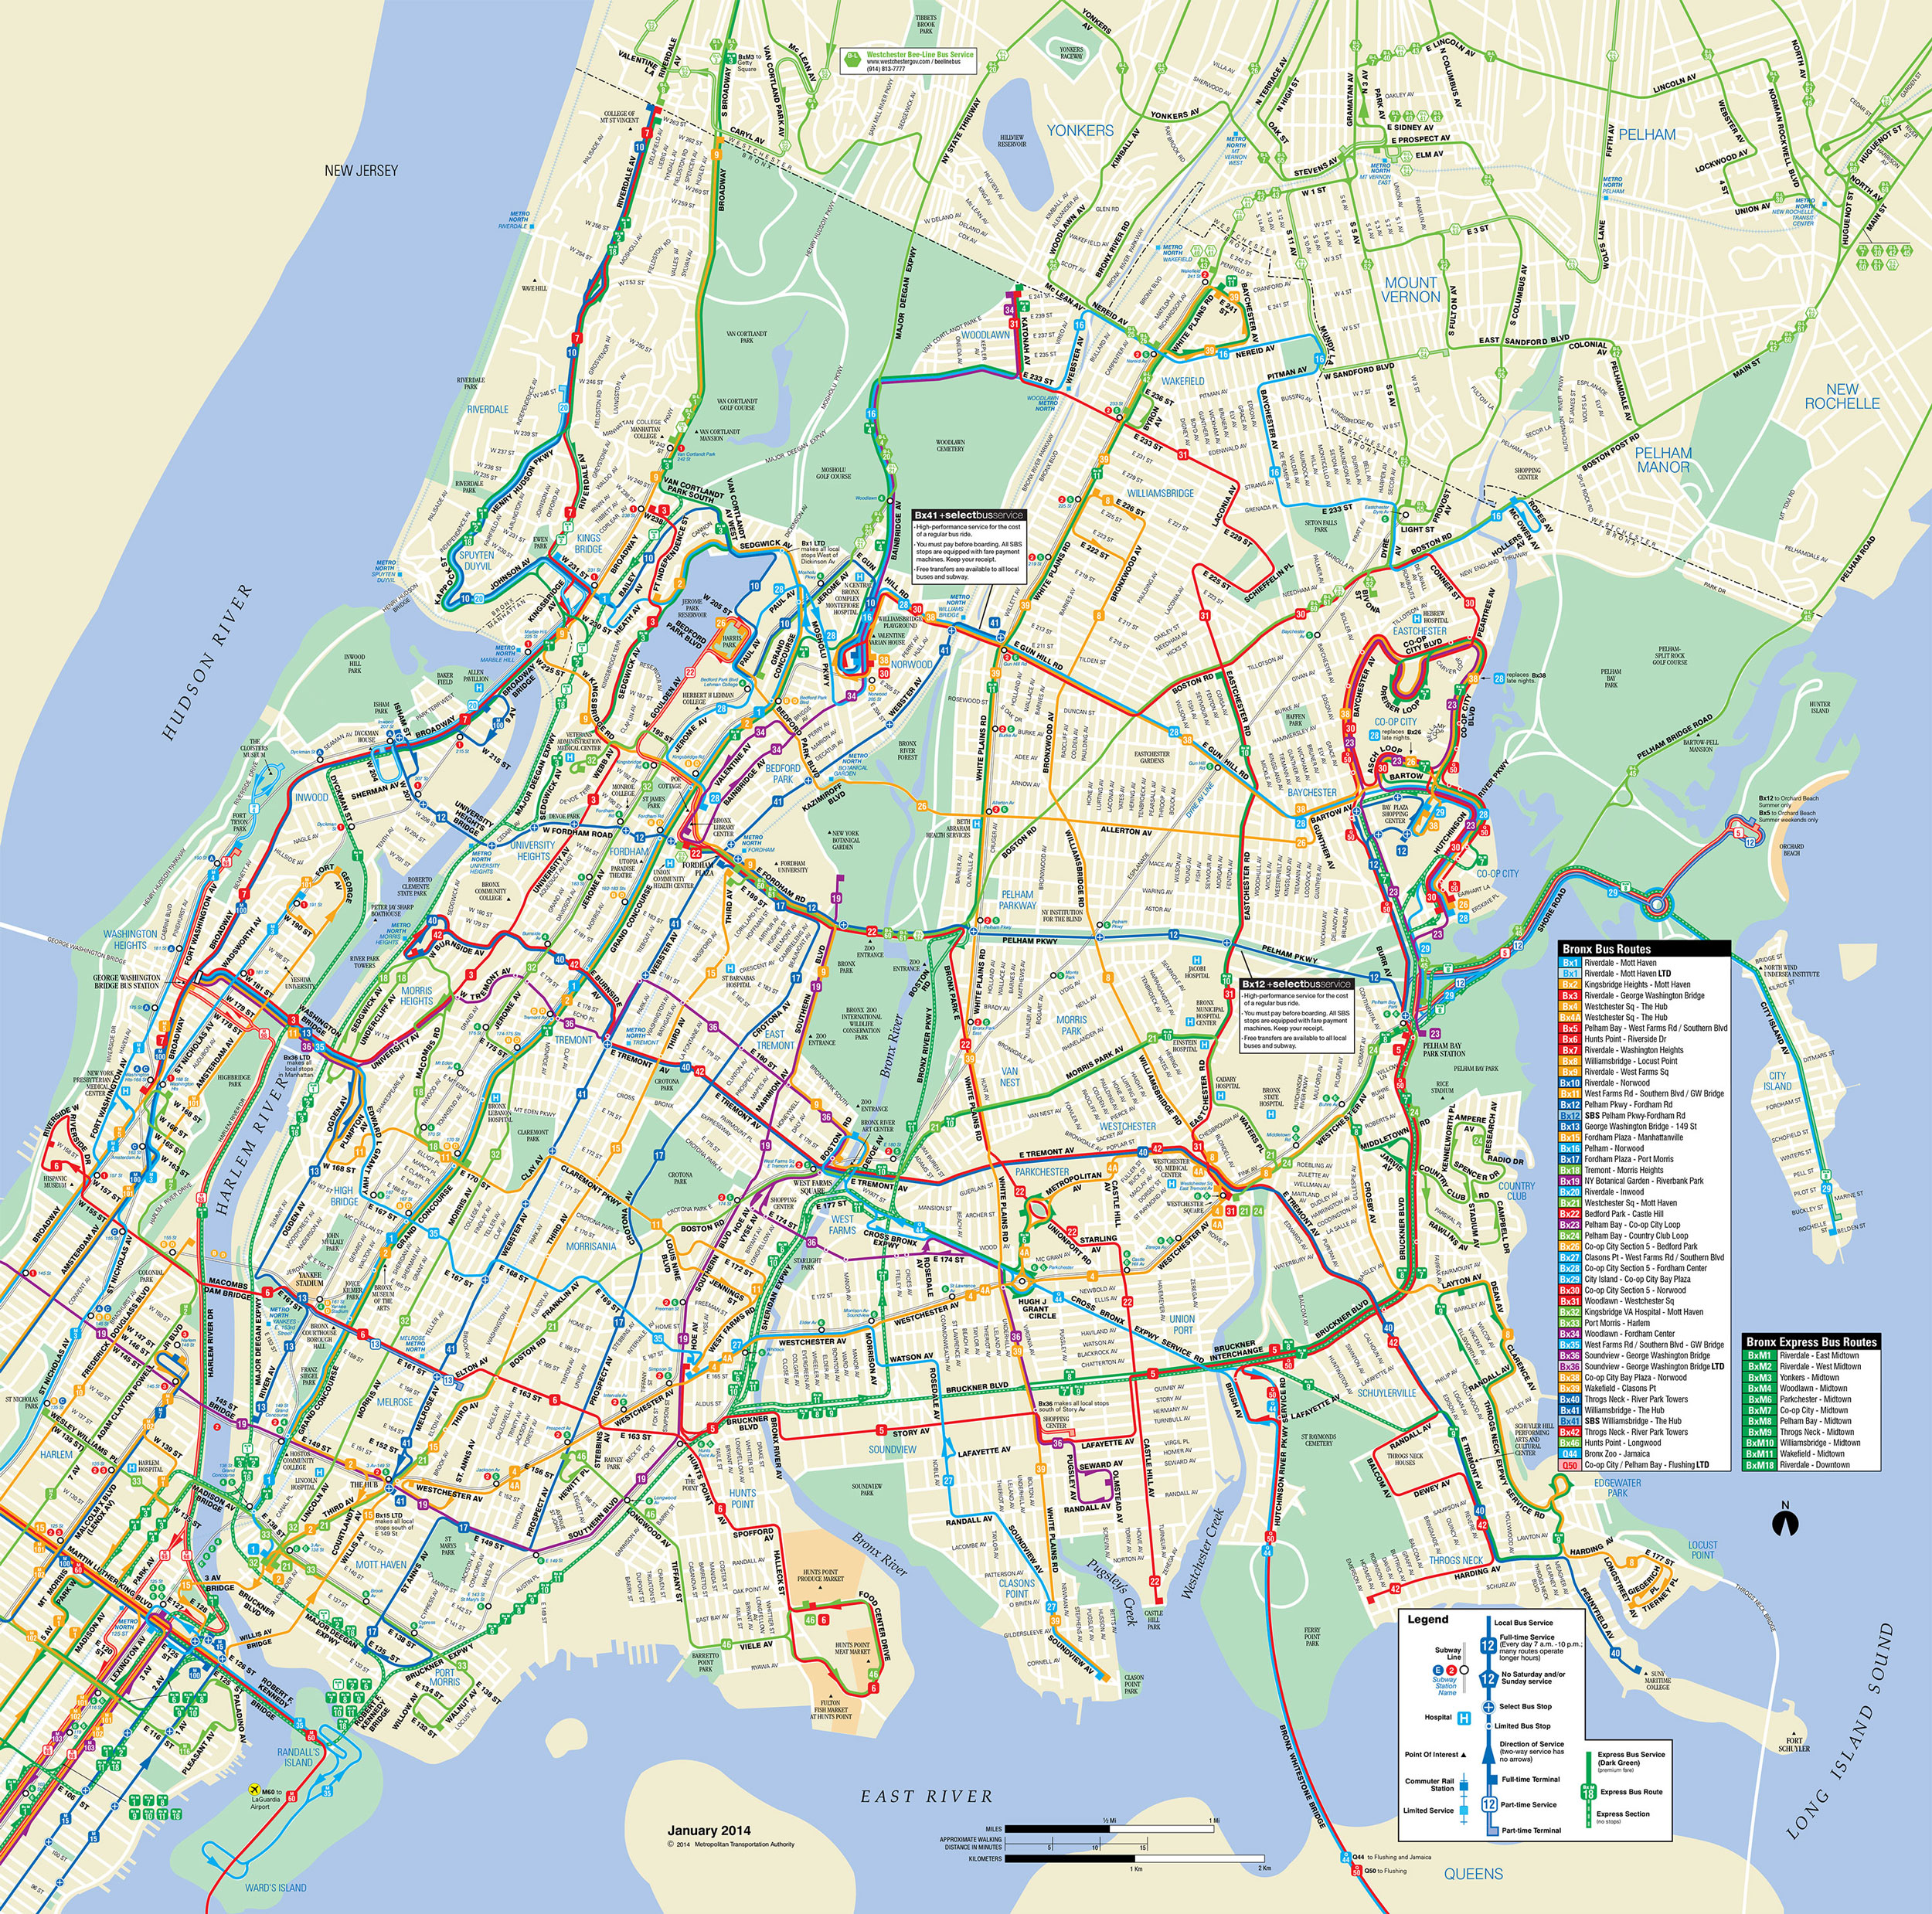 nyc bus map brooklyn Map Of Nyc Bus Stations Lines nyc bus map brooklyn